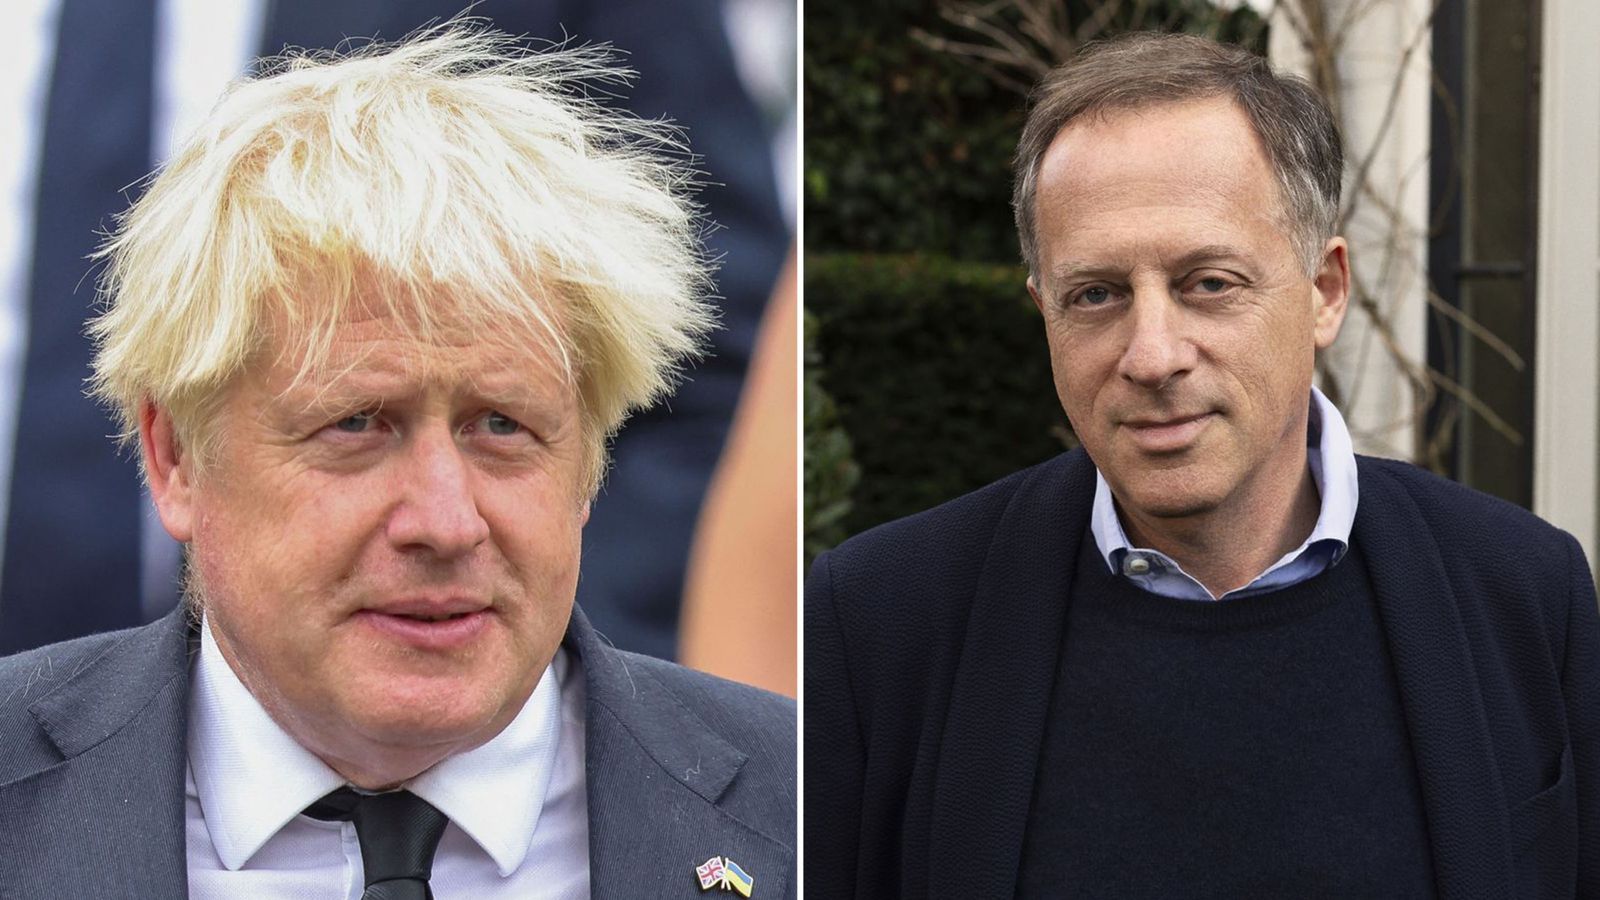 Boris Johnson told to stop asking Richard Sharp for financial advice days before he was made BBC chair - reports